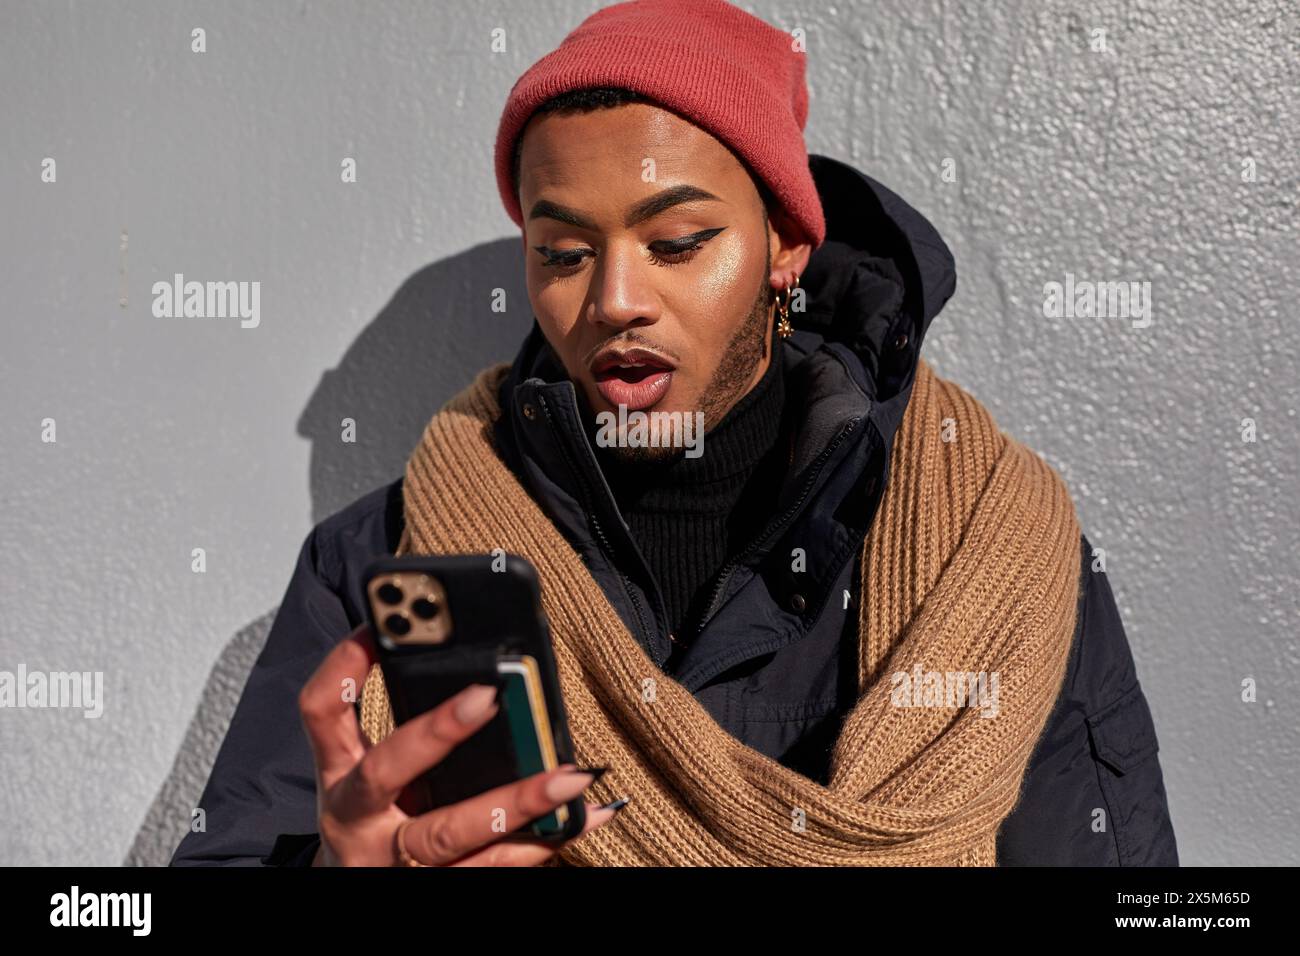 USA, New York City, Queer man in warm clothing looking at smart phone Stock Photo